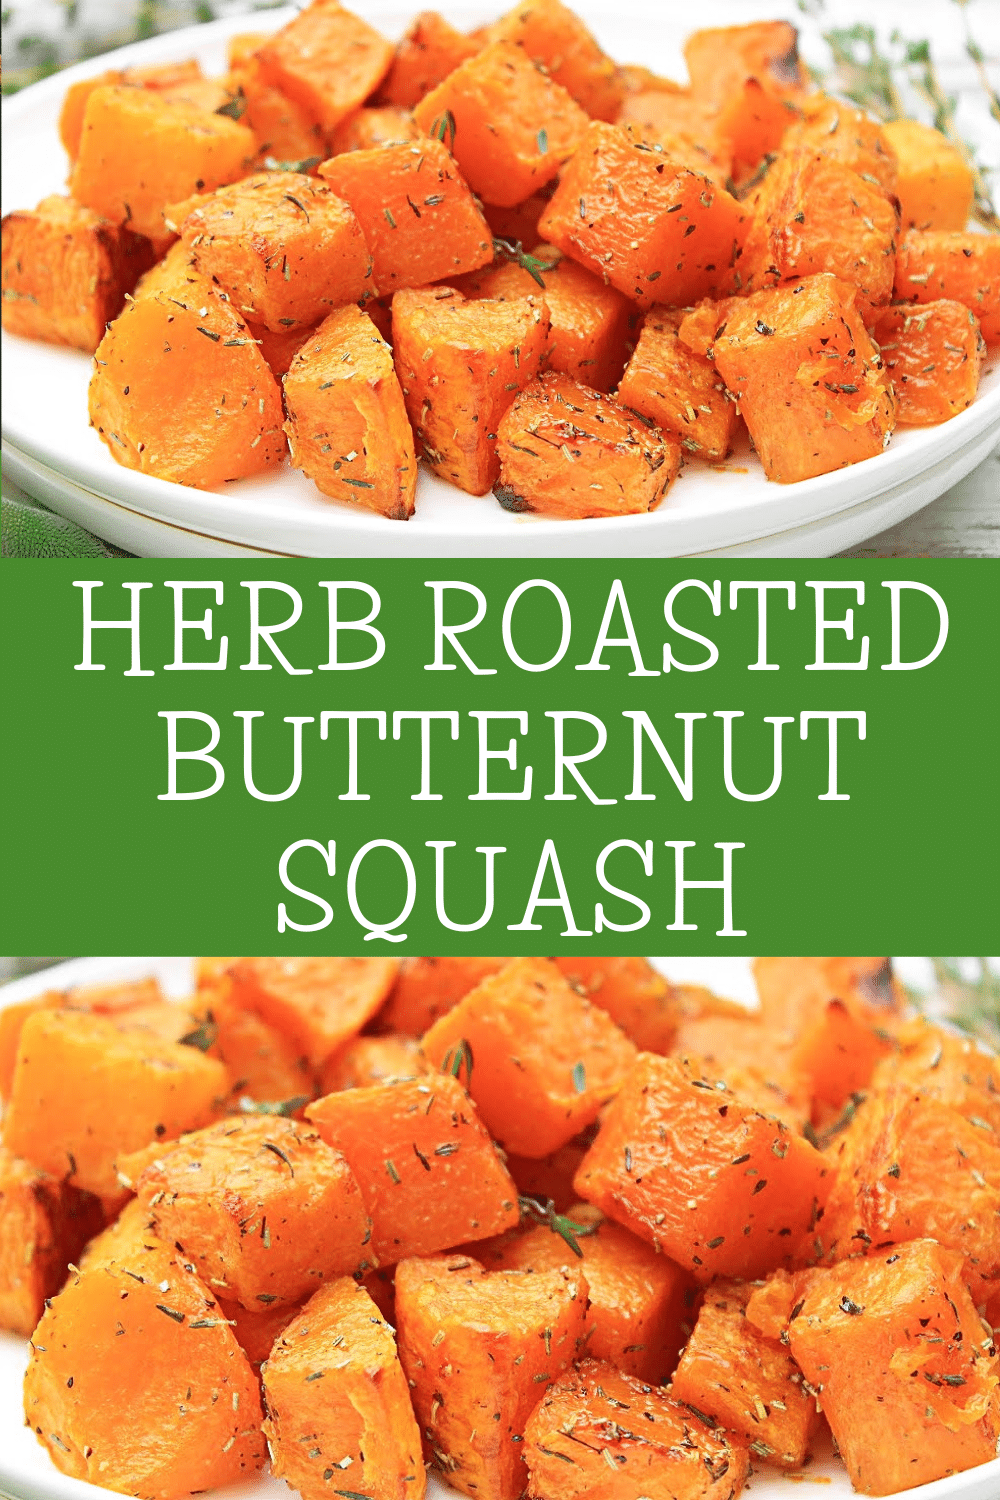 Herb Roasted Butternut Squash ~ Easy side dish with the savory flavors of fresh herbs and the natural sweetness of butternut squash.  via @thiswifecooks